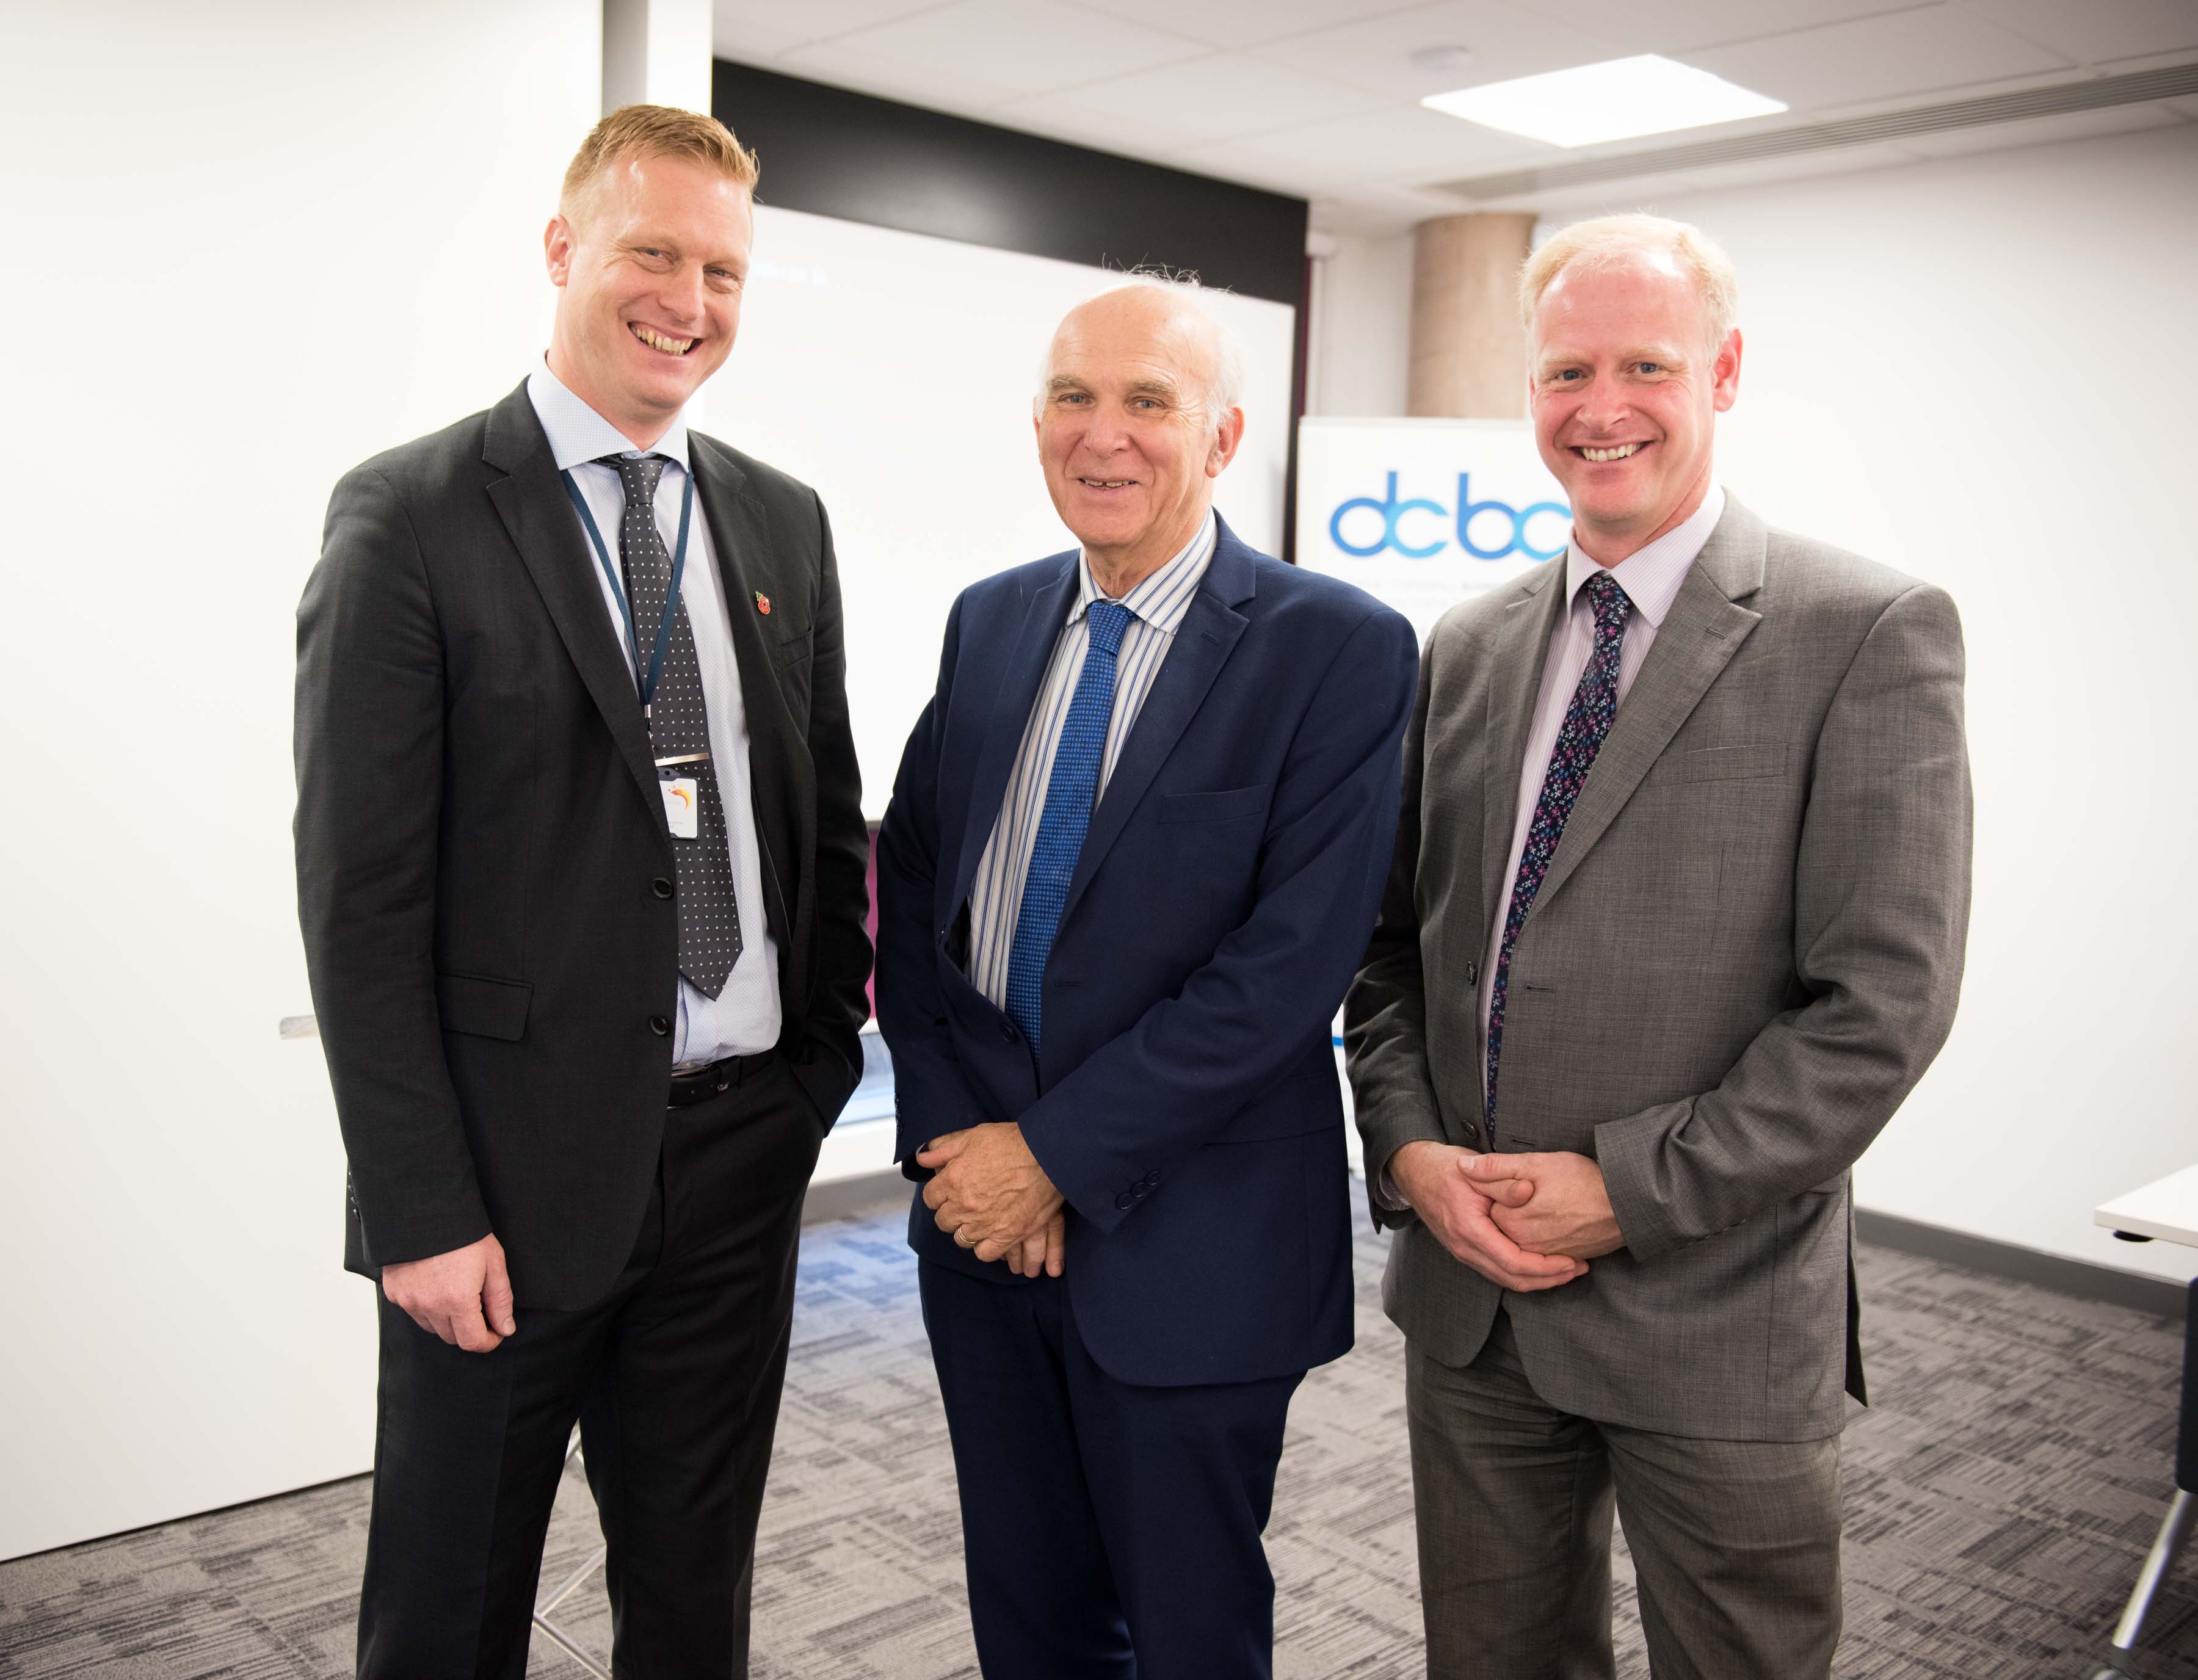 Sir Vince Cable MP visits Rx-info